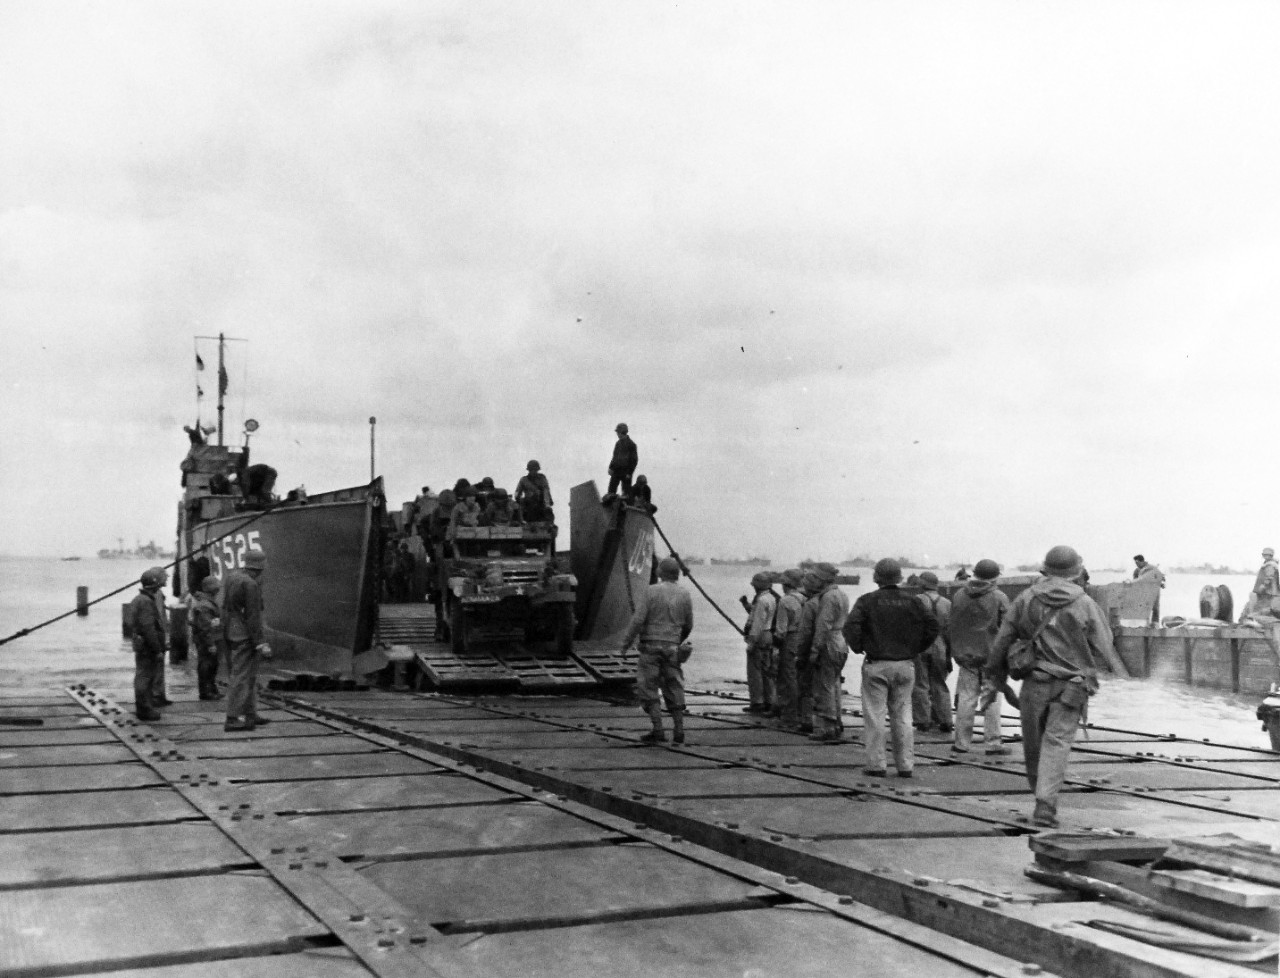 80-G-285136:  Normandy Invasion, Mulberries, June 1944.   The pontoon causeway at “Utah” beach, forming part of the U.S. Mulberry the man-made harbor off coast of France, built to protect landing craft from storms in English Channel.  Note LCT 525. Photograph released November 7, 1944.  Official U.S. Navy photograph, now in the collections of the National Archives.  (2016/03/15).